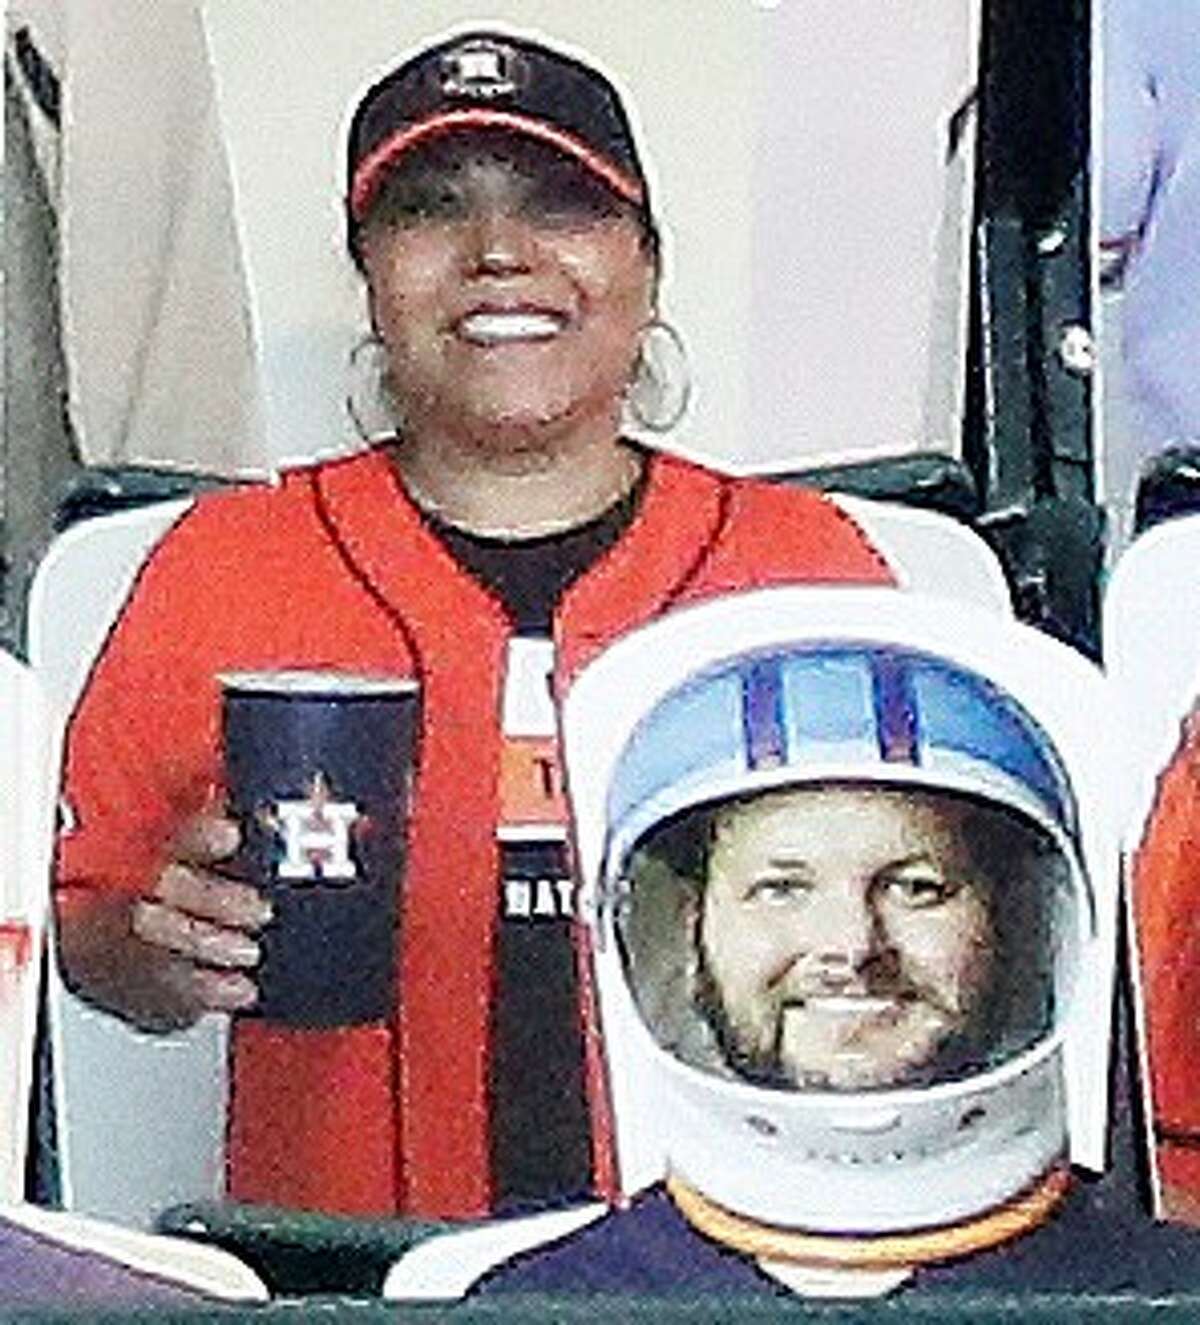 The Crawford Boxes aren't the Crawford Boxes without beers. So, salute to this woman for coming prepared. And, Ol' Astronaut Helmet there is ready if the beers lead to rowdiness at any point during the season.